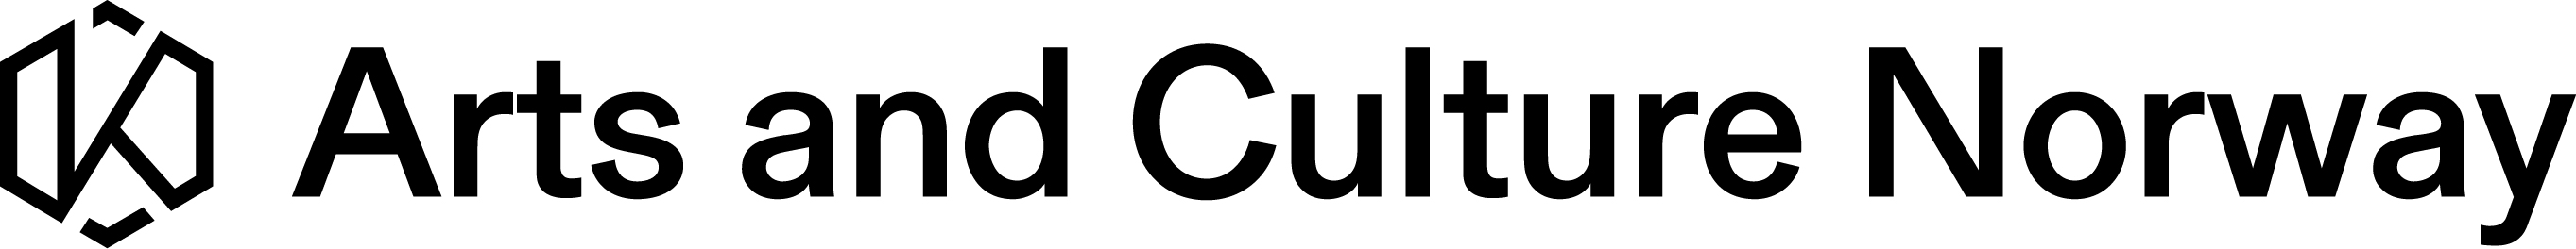 Arts and Culture Norway English logo